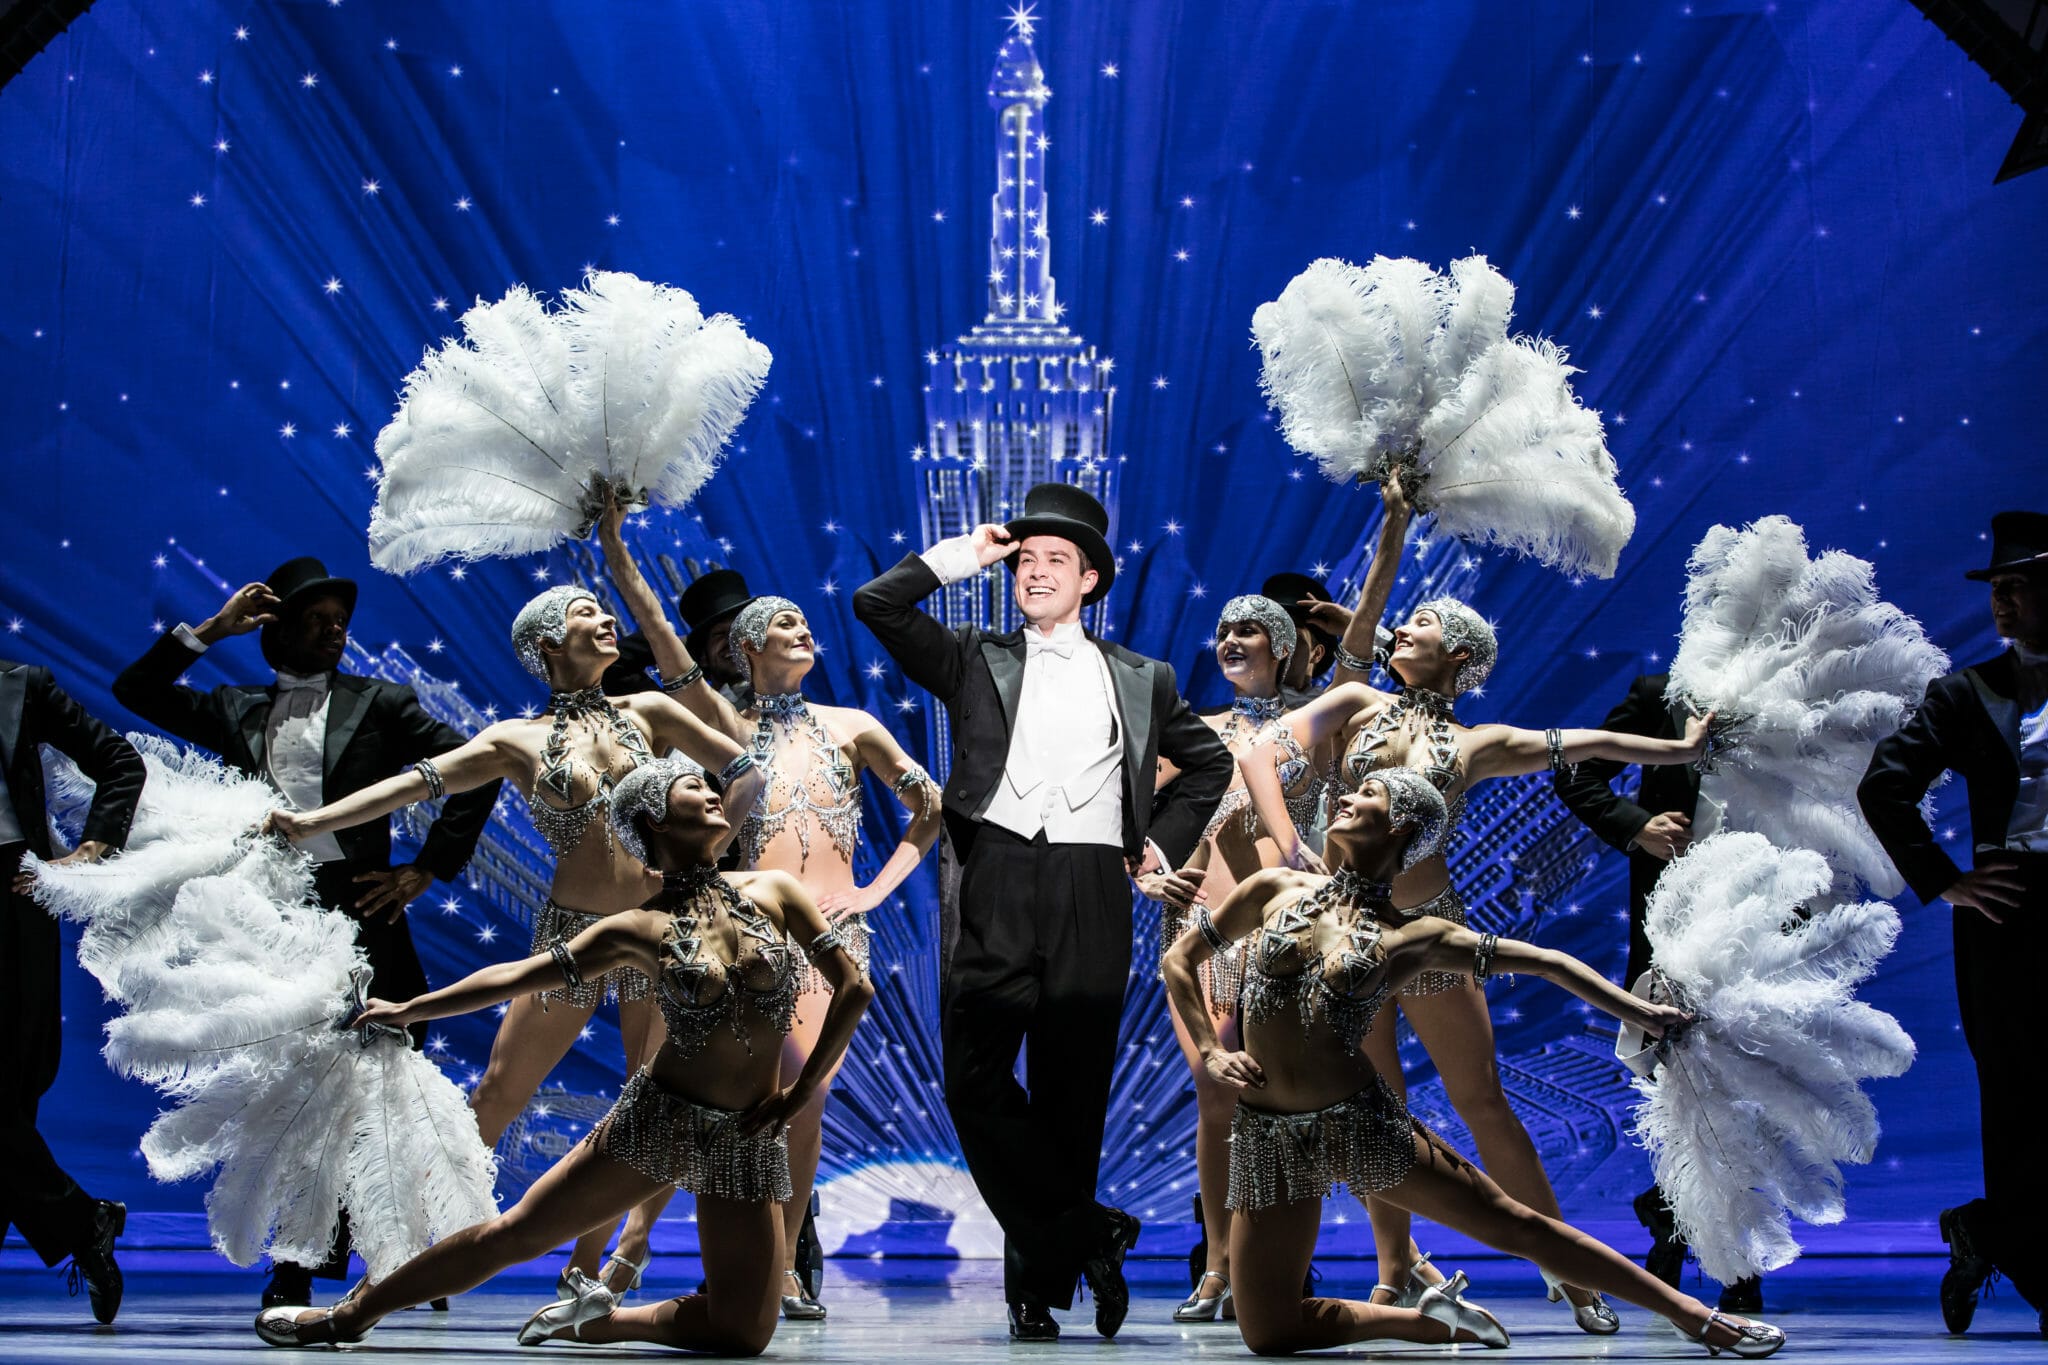 Broadway in Chicago AN AMERICAN IN PARIS